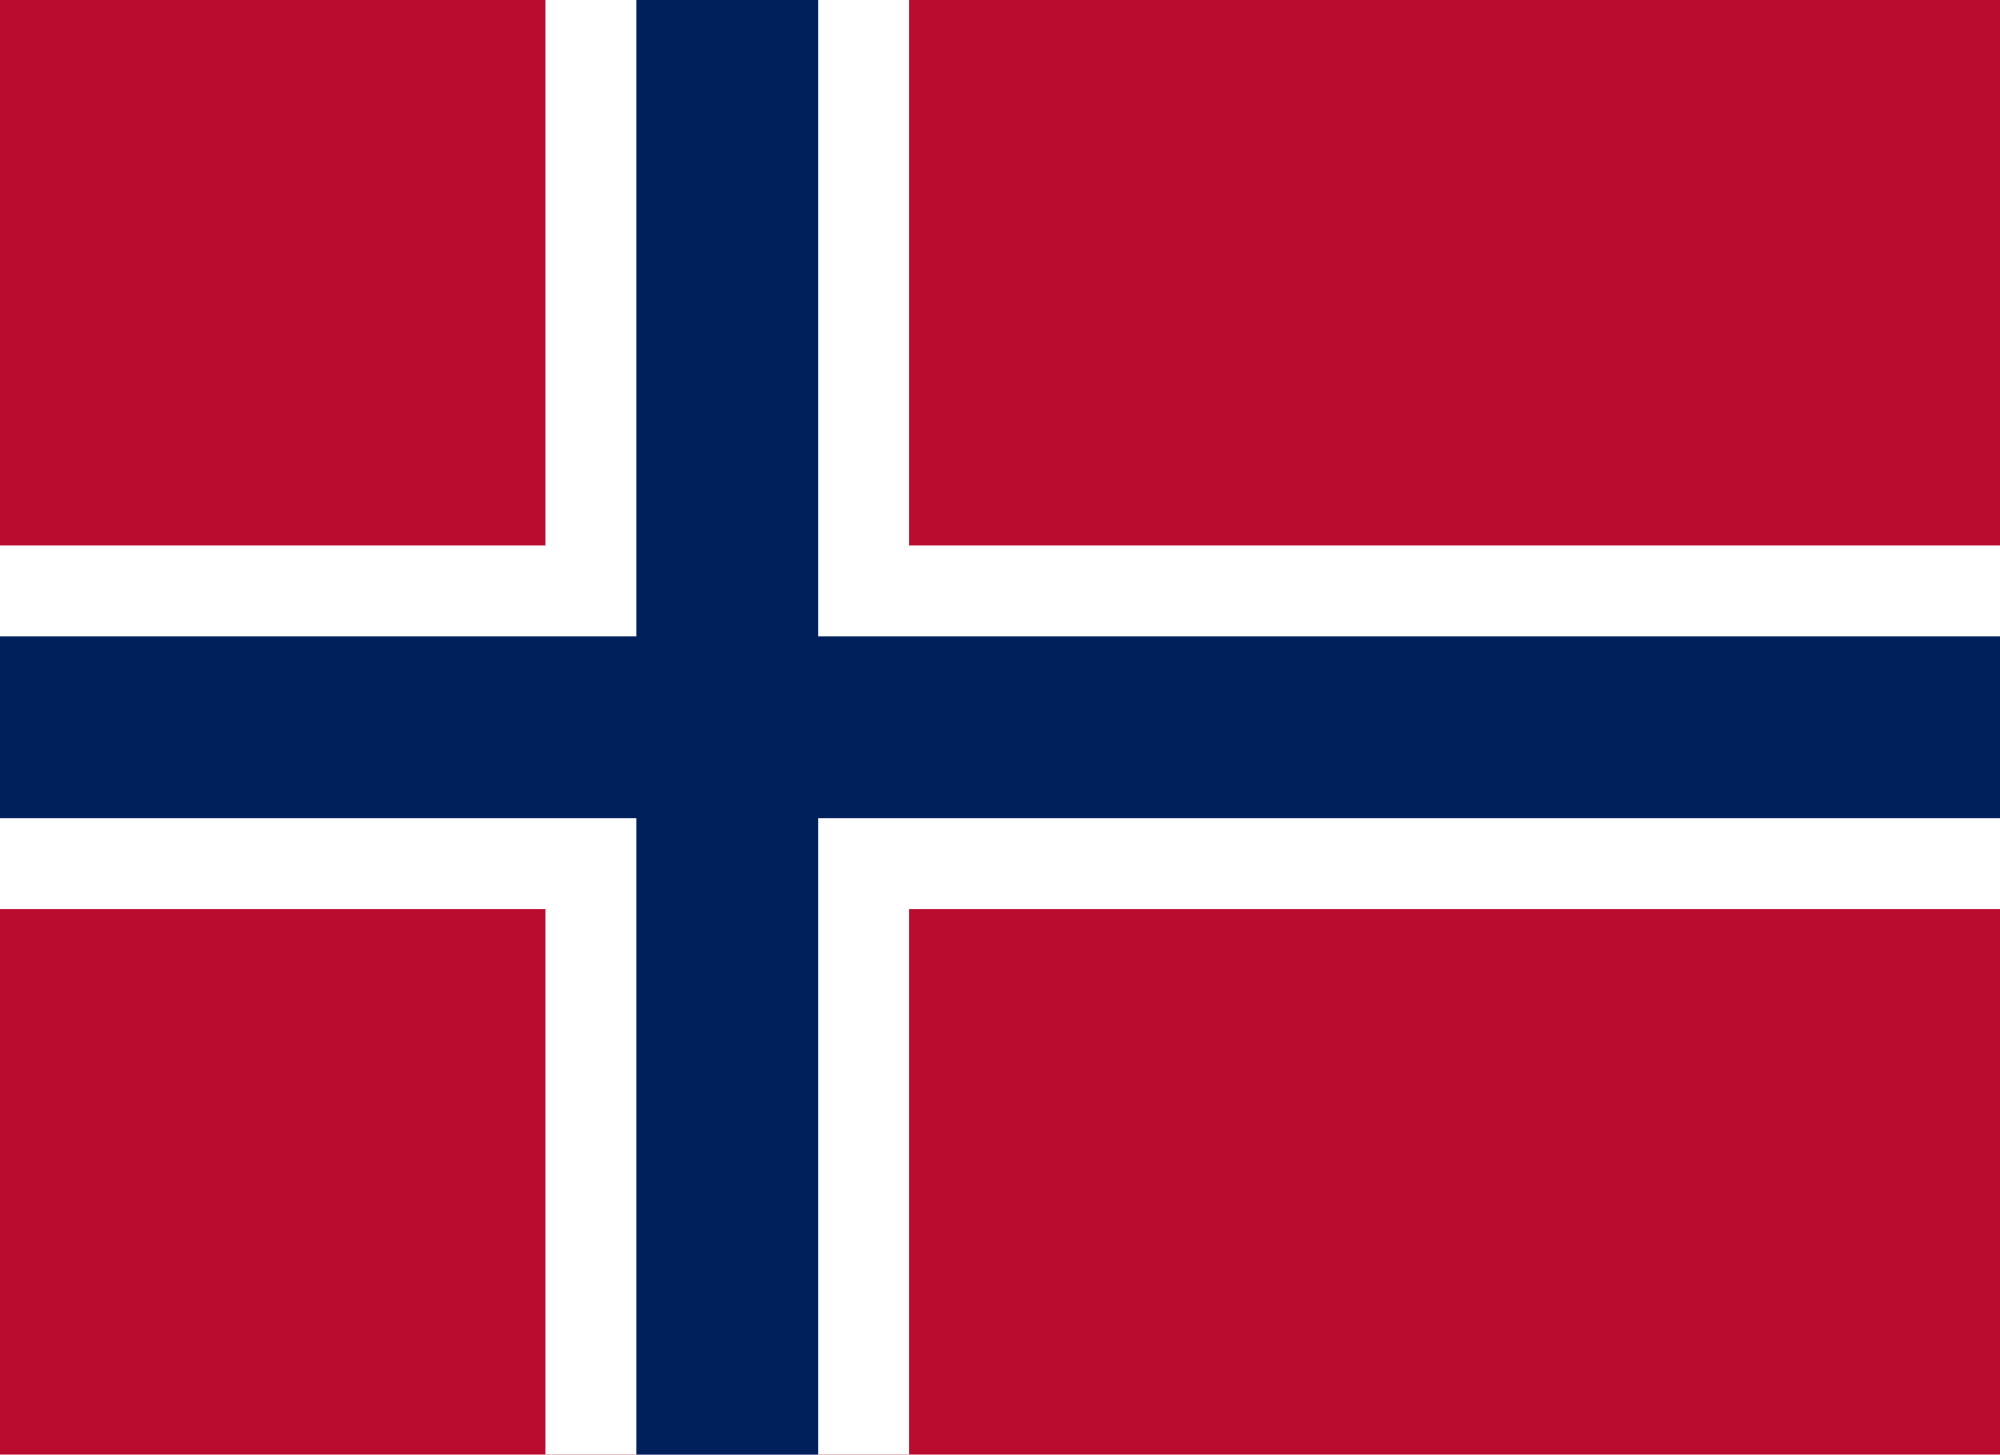 2000px-Flag_of_Norway.svg.png